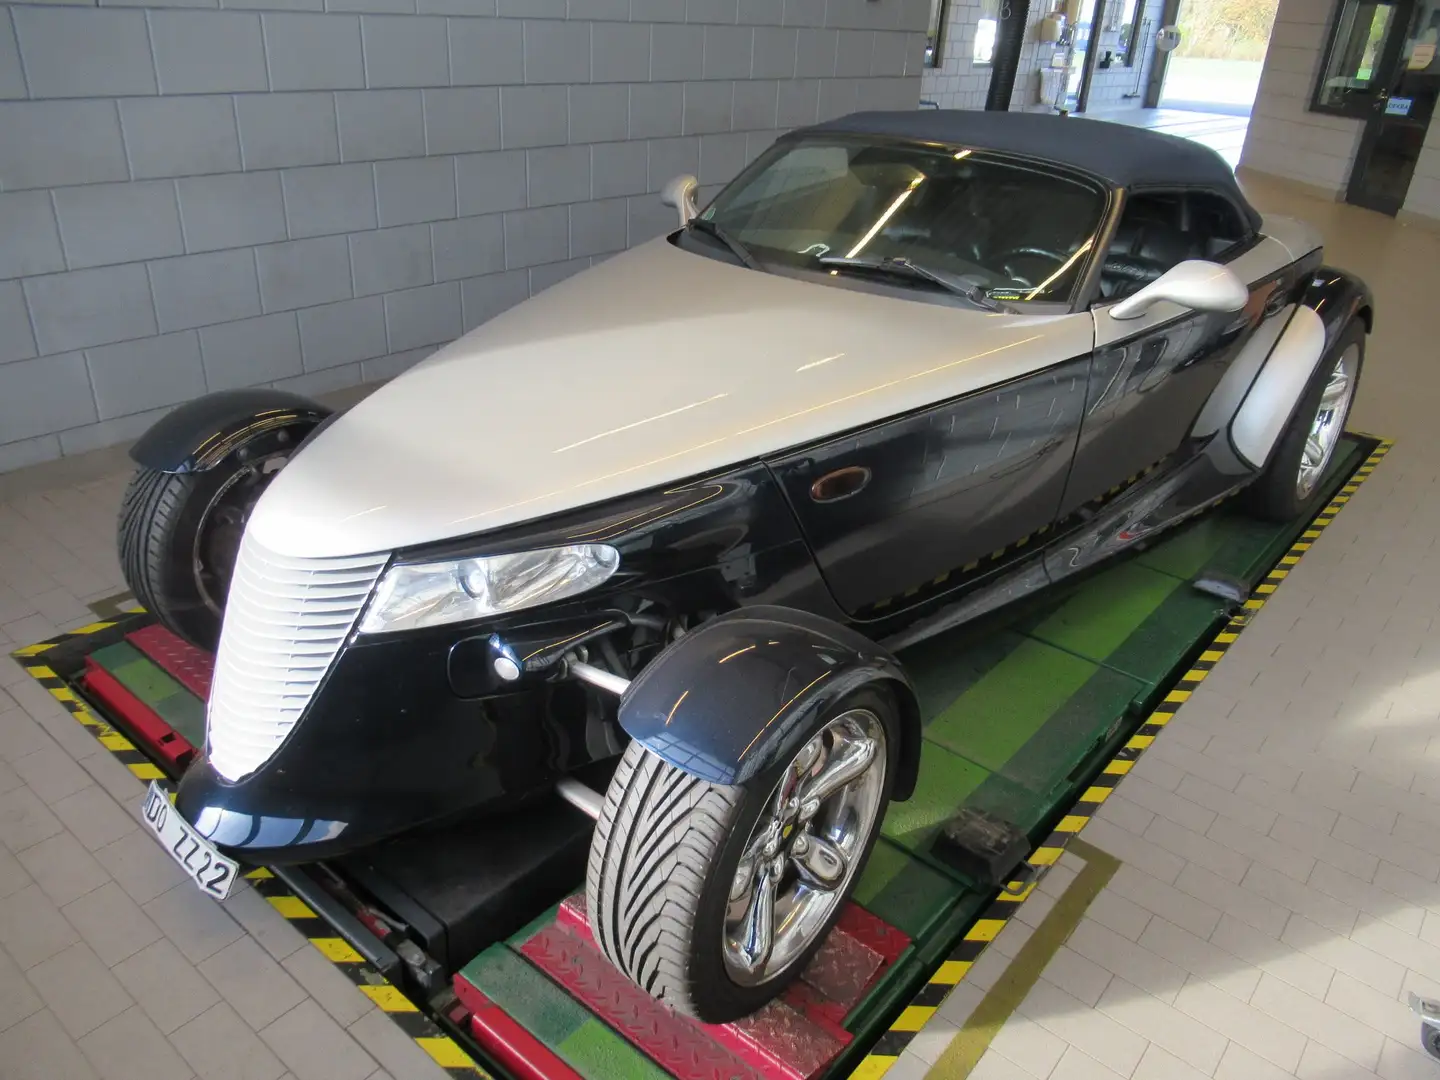 Plymouth Prowler # # # Cool Car for Crazy People # # # Bleu - 2